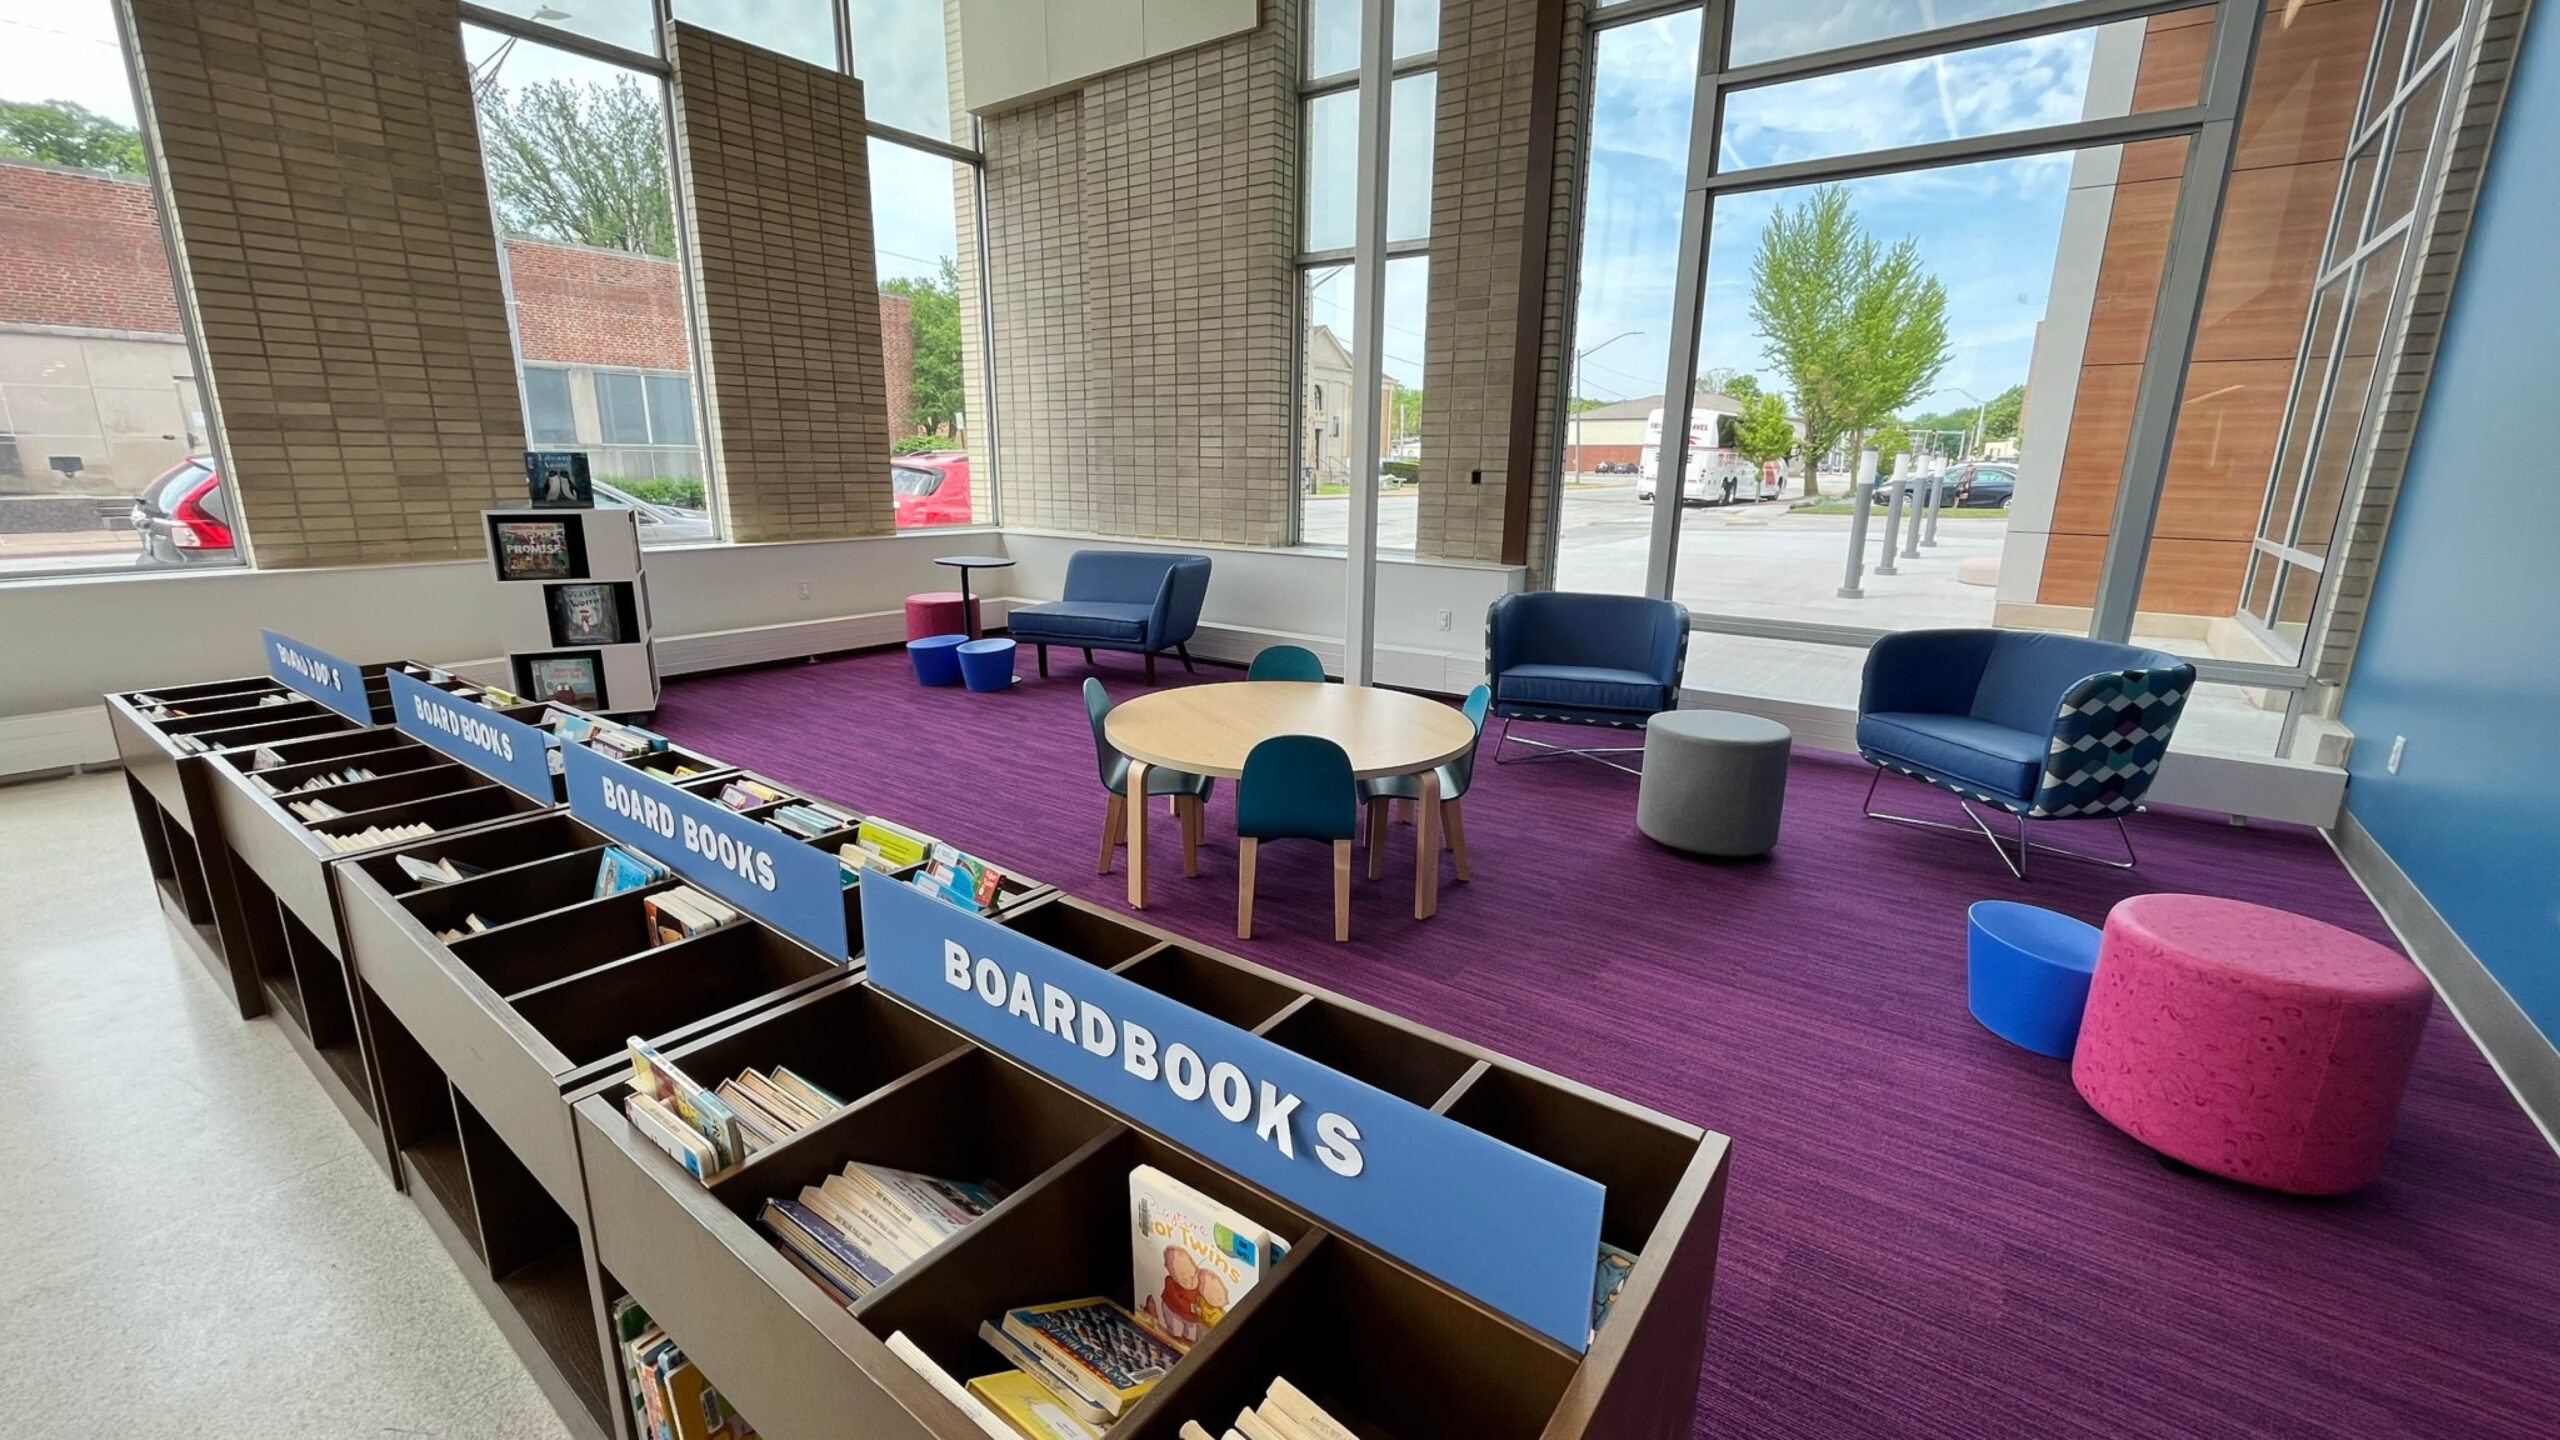 kids area of a library with tables and chairs and bookshelves